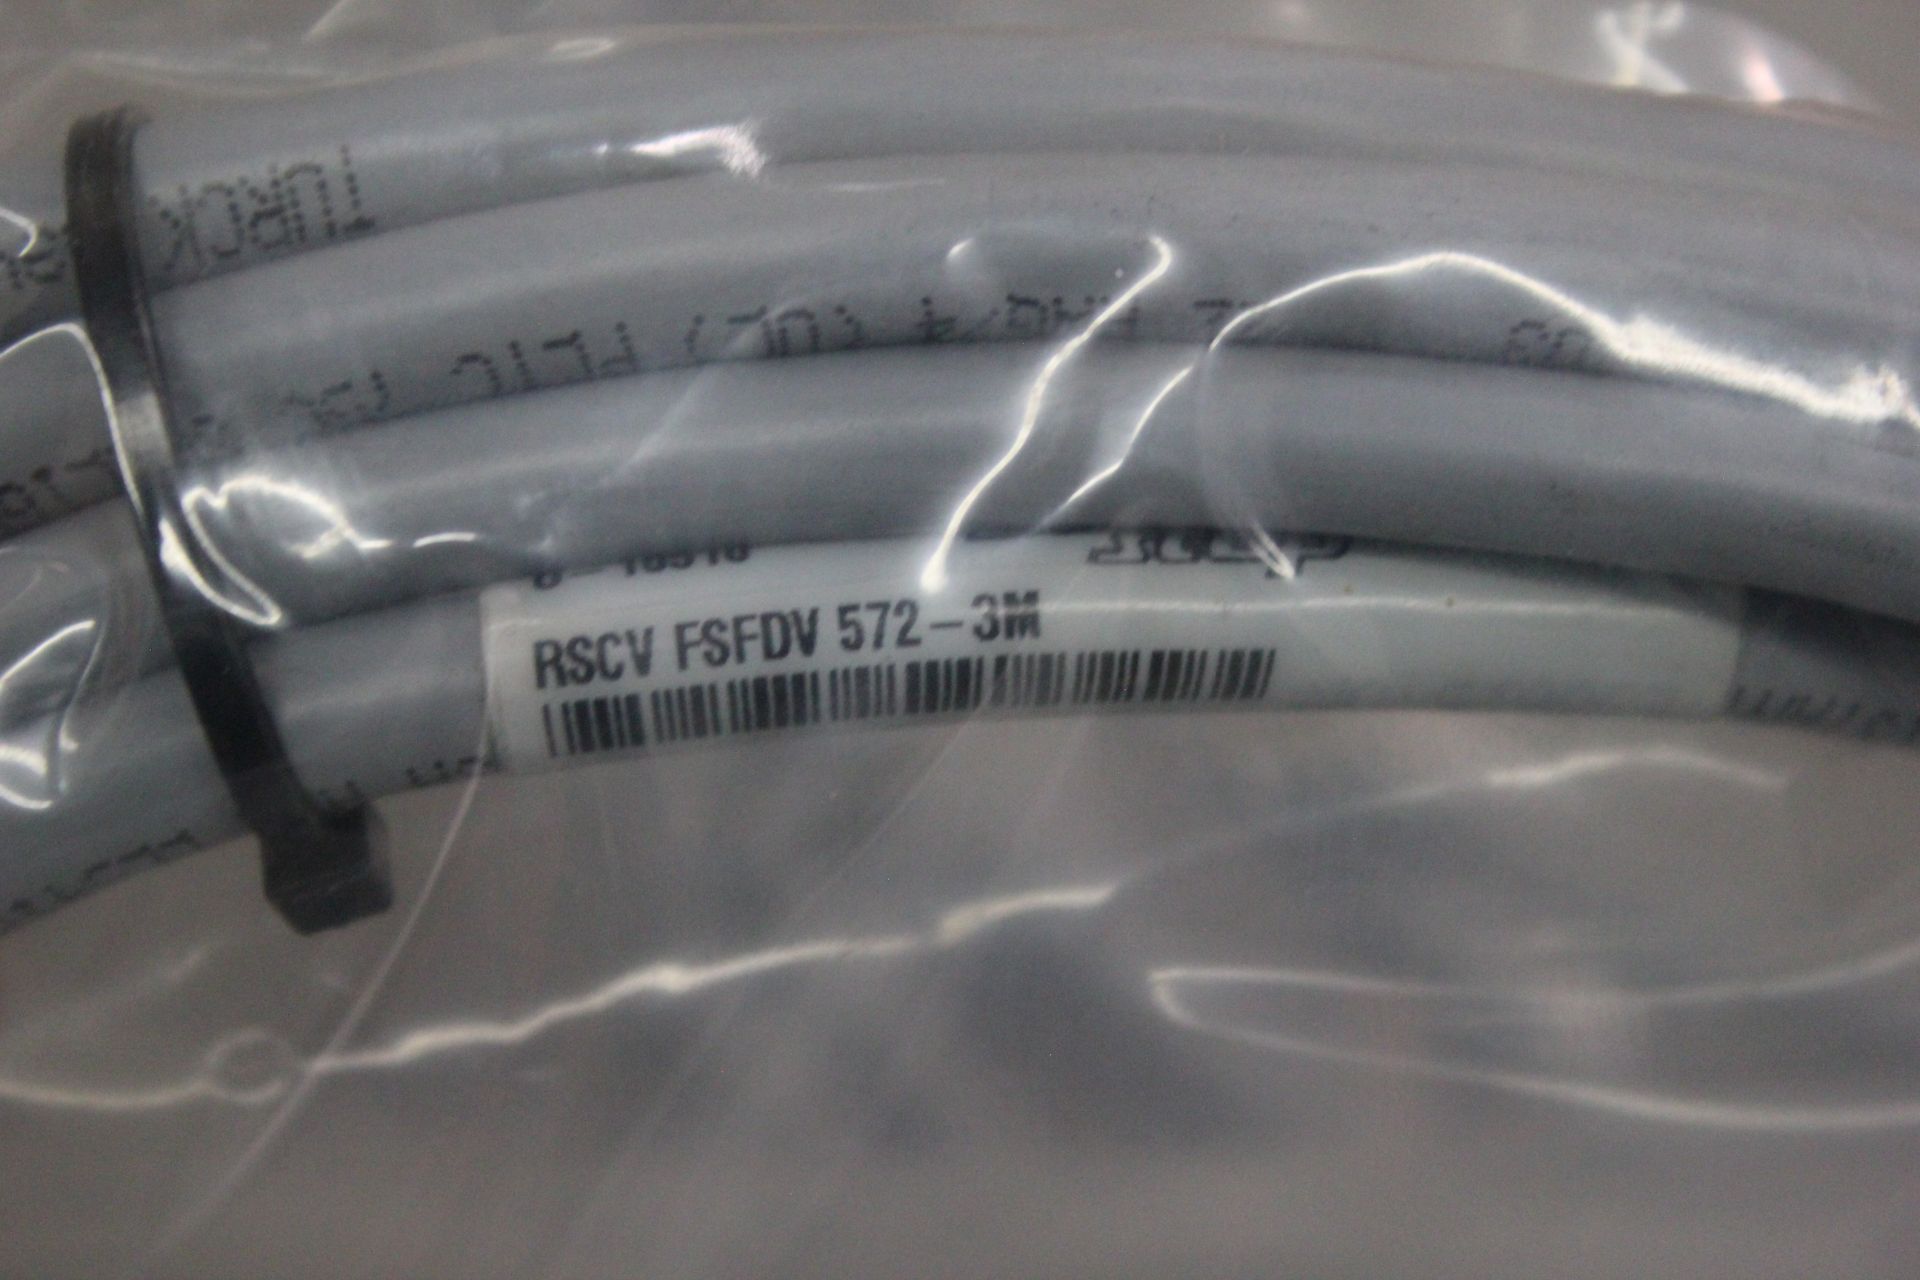 LOT OF NEW TURCK CABLES - Image 4 of 4